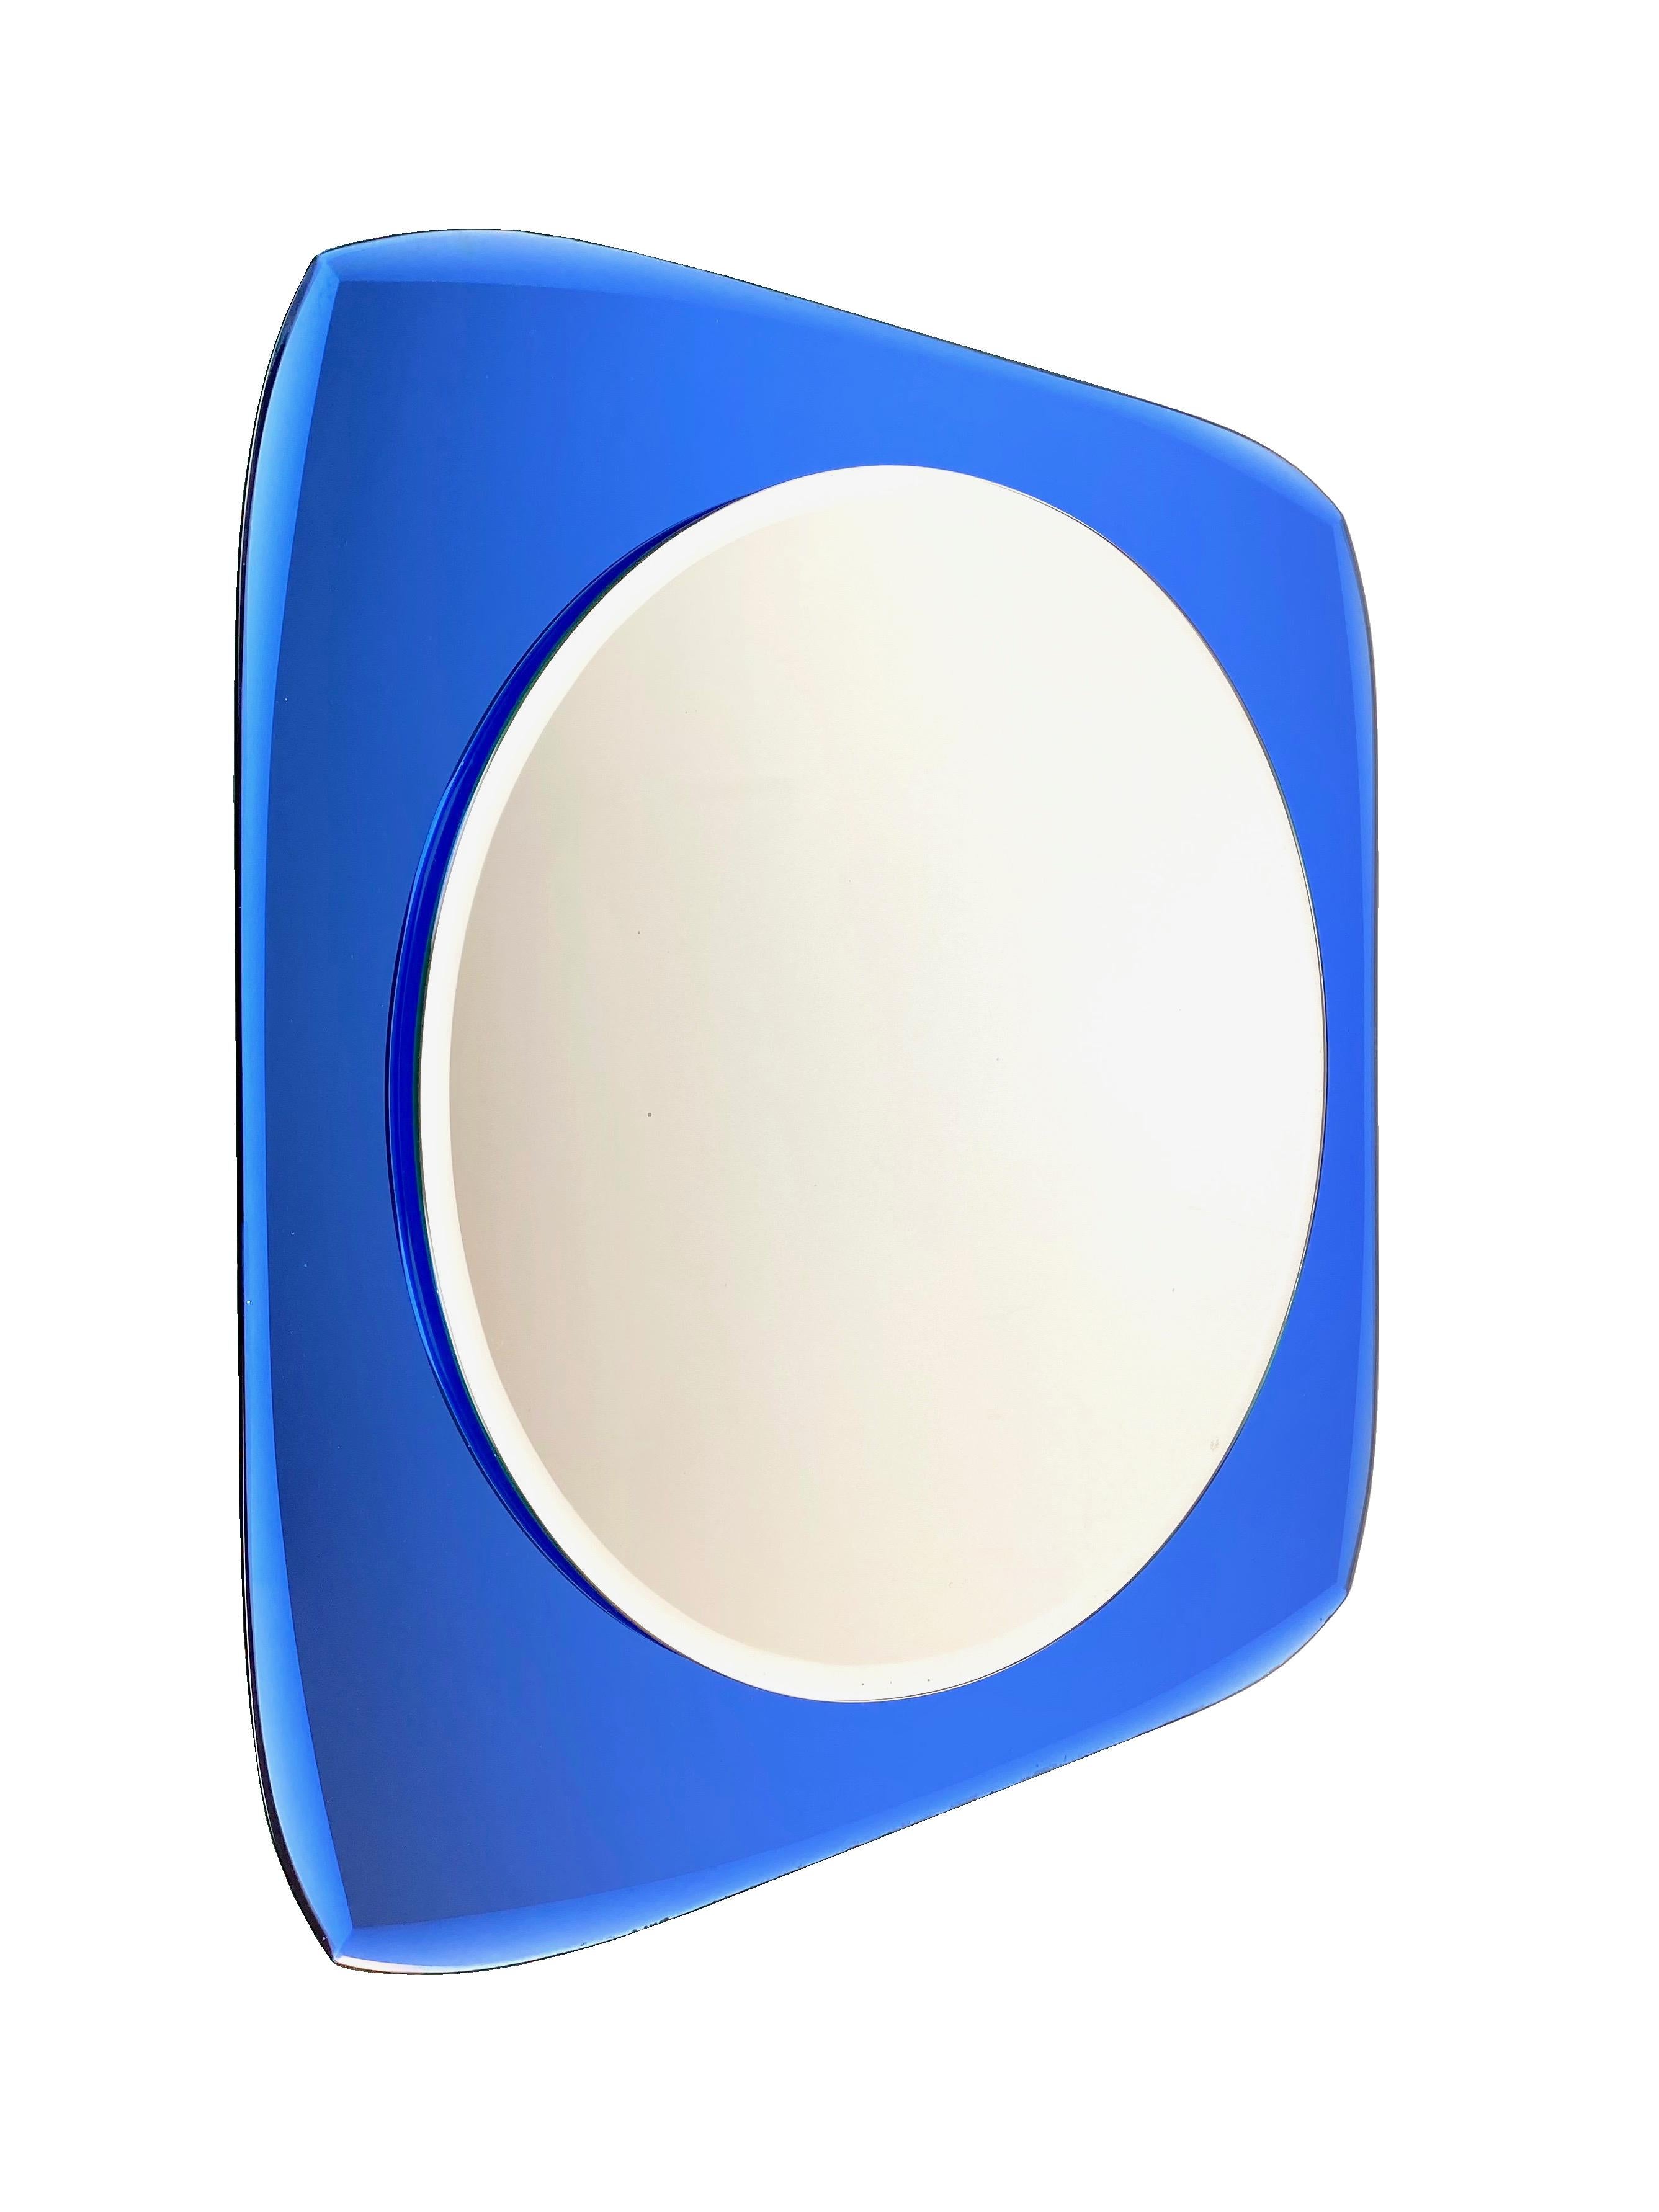 Squared wall blue framed mirror attributed to the Italian brand Fontana Arte, 1960s.